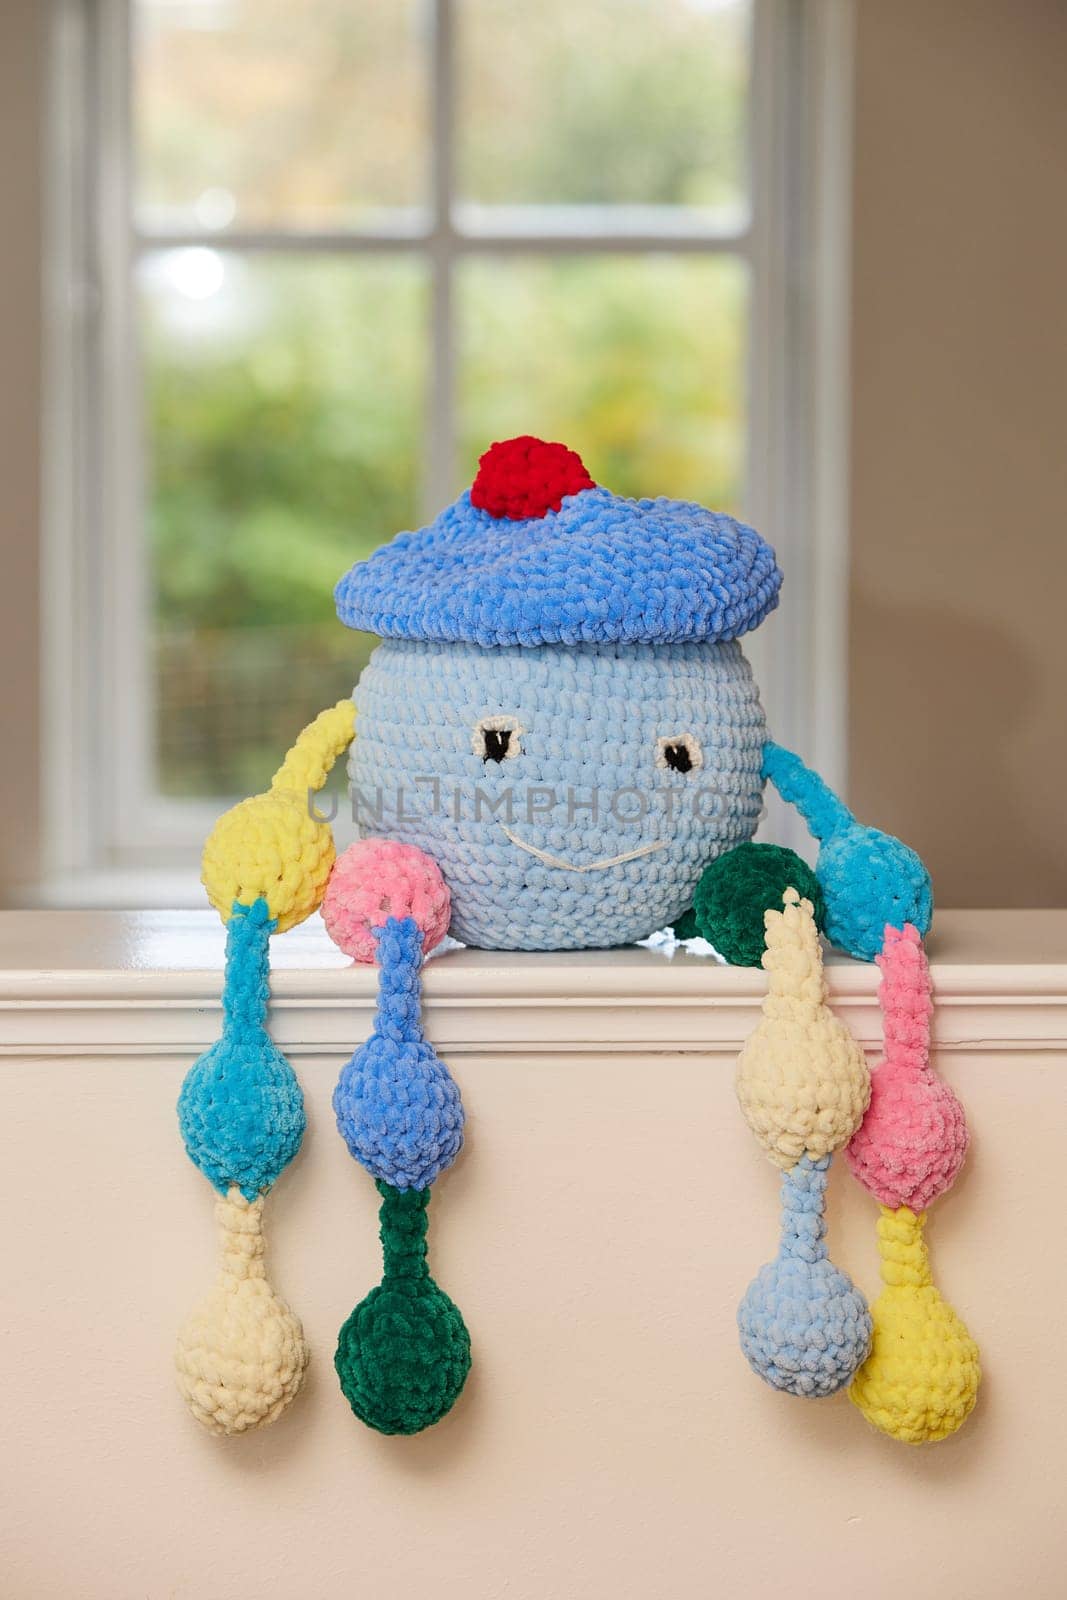 Cute knitted toy at home in the kitchen.